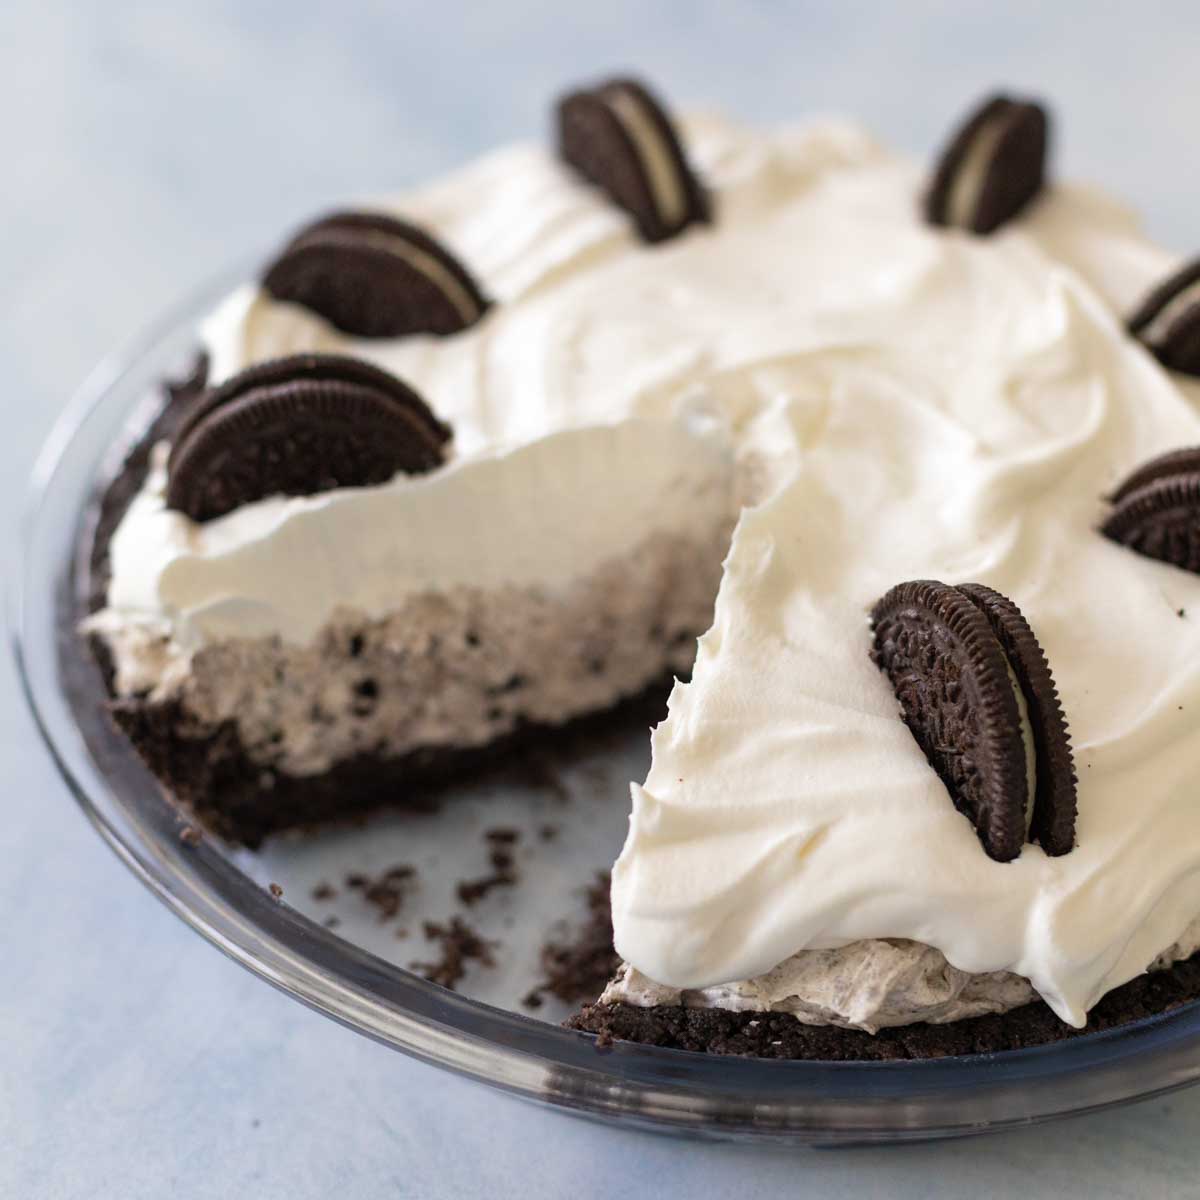 The oreo cream pie has one slice missing so you can see the cookie crust, oreo cookie cream center, and whipped topping.